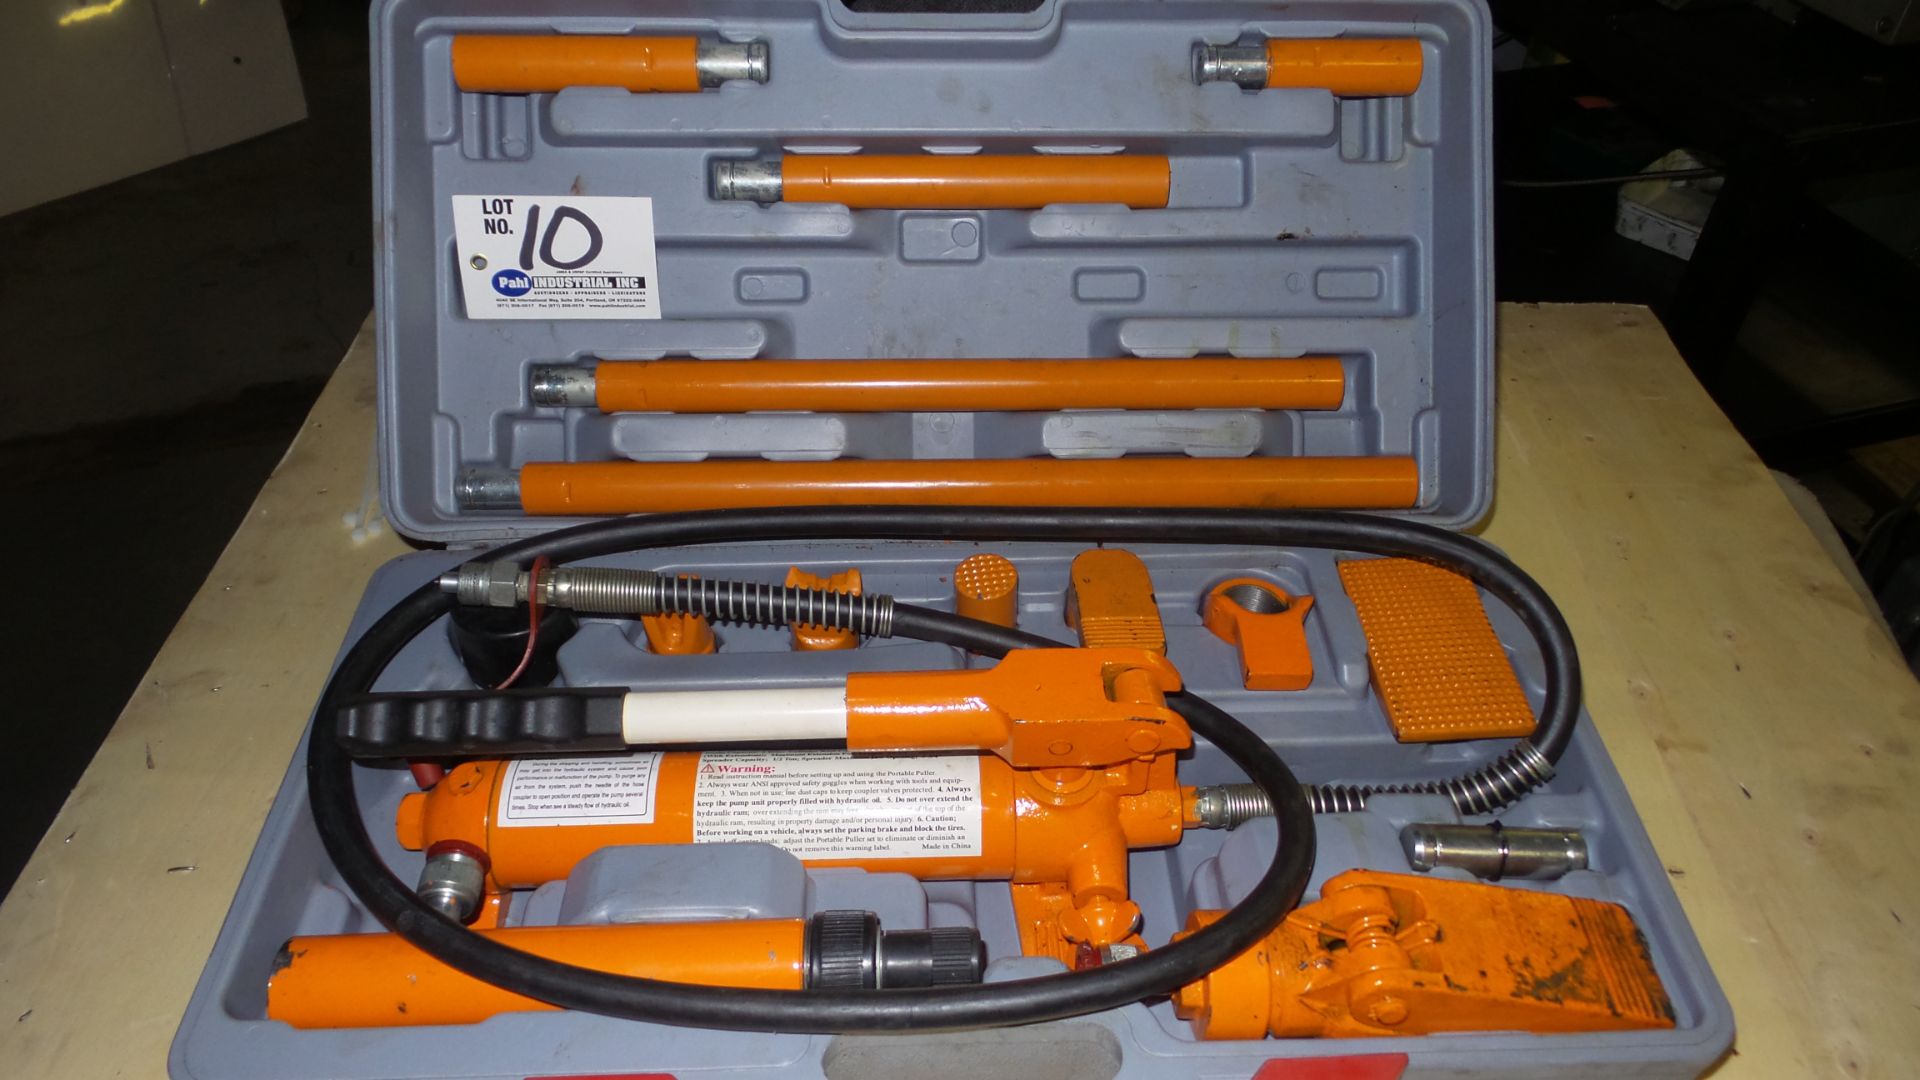 Central Hydraulics 4 Ton Portalble Hydraulic Puller Set Complete with Box